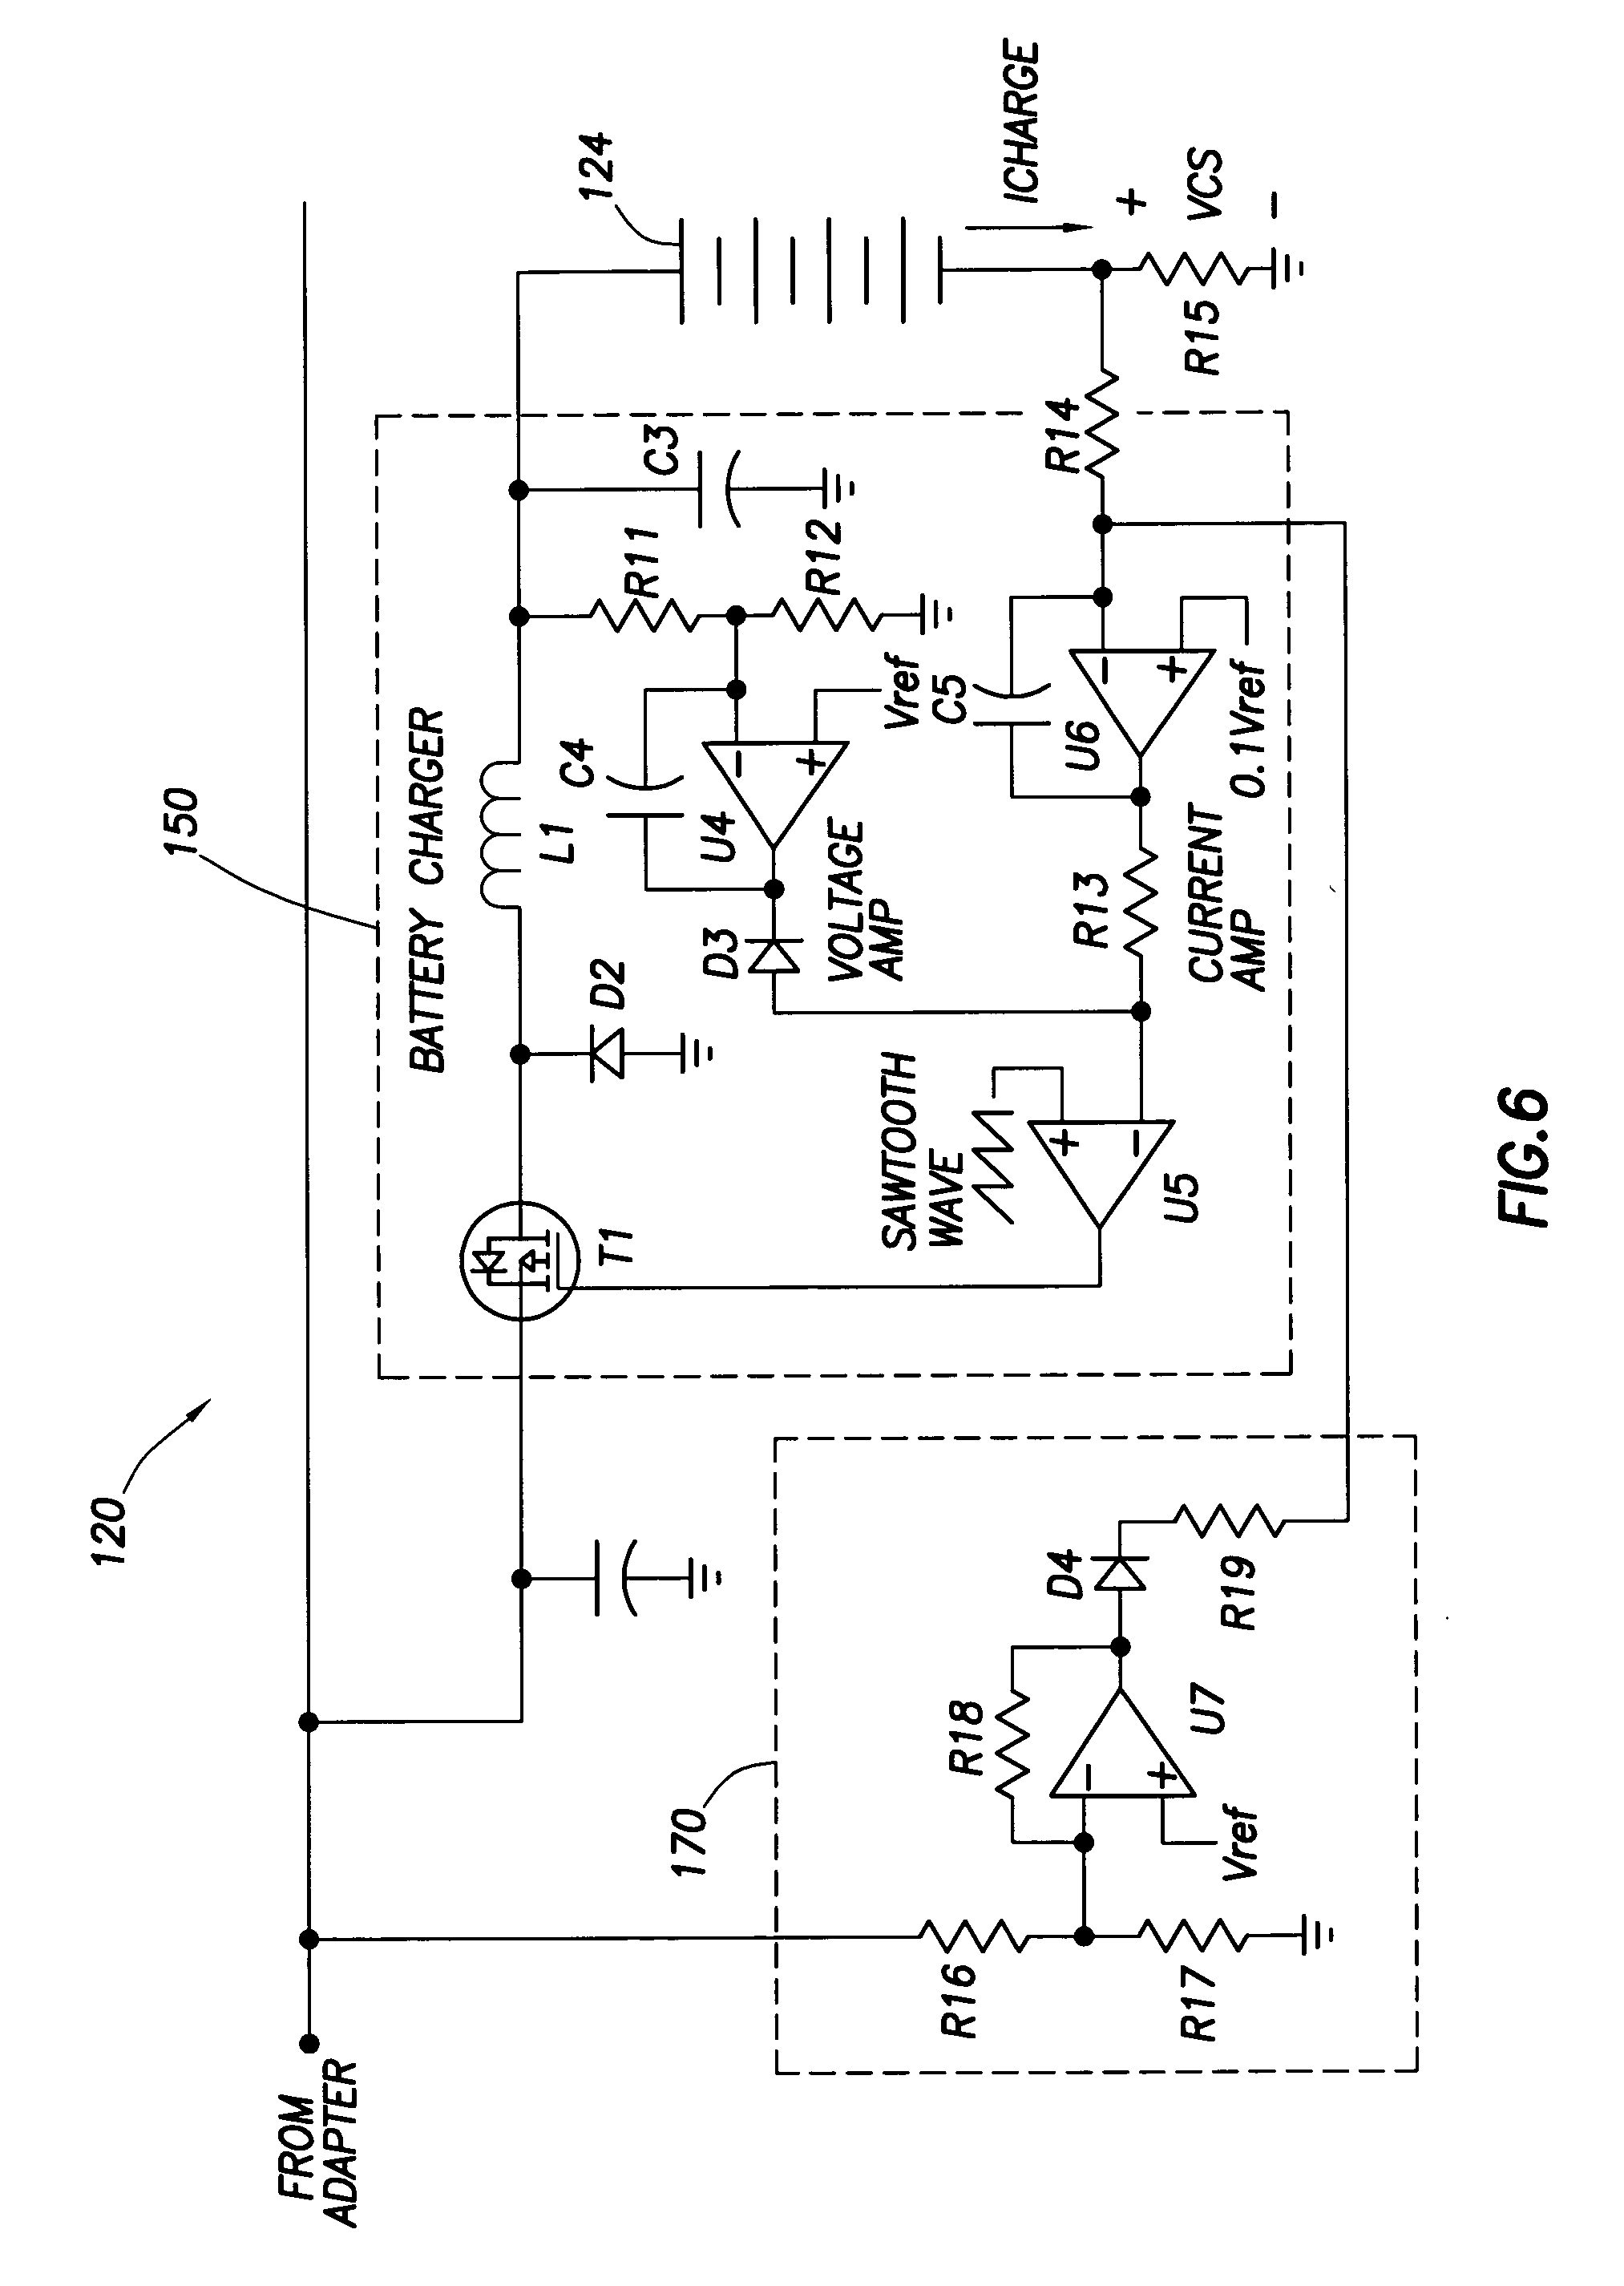 Technique for conveying overload conditions from an AC adapter to a load powered by the adapter